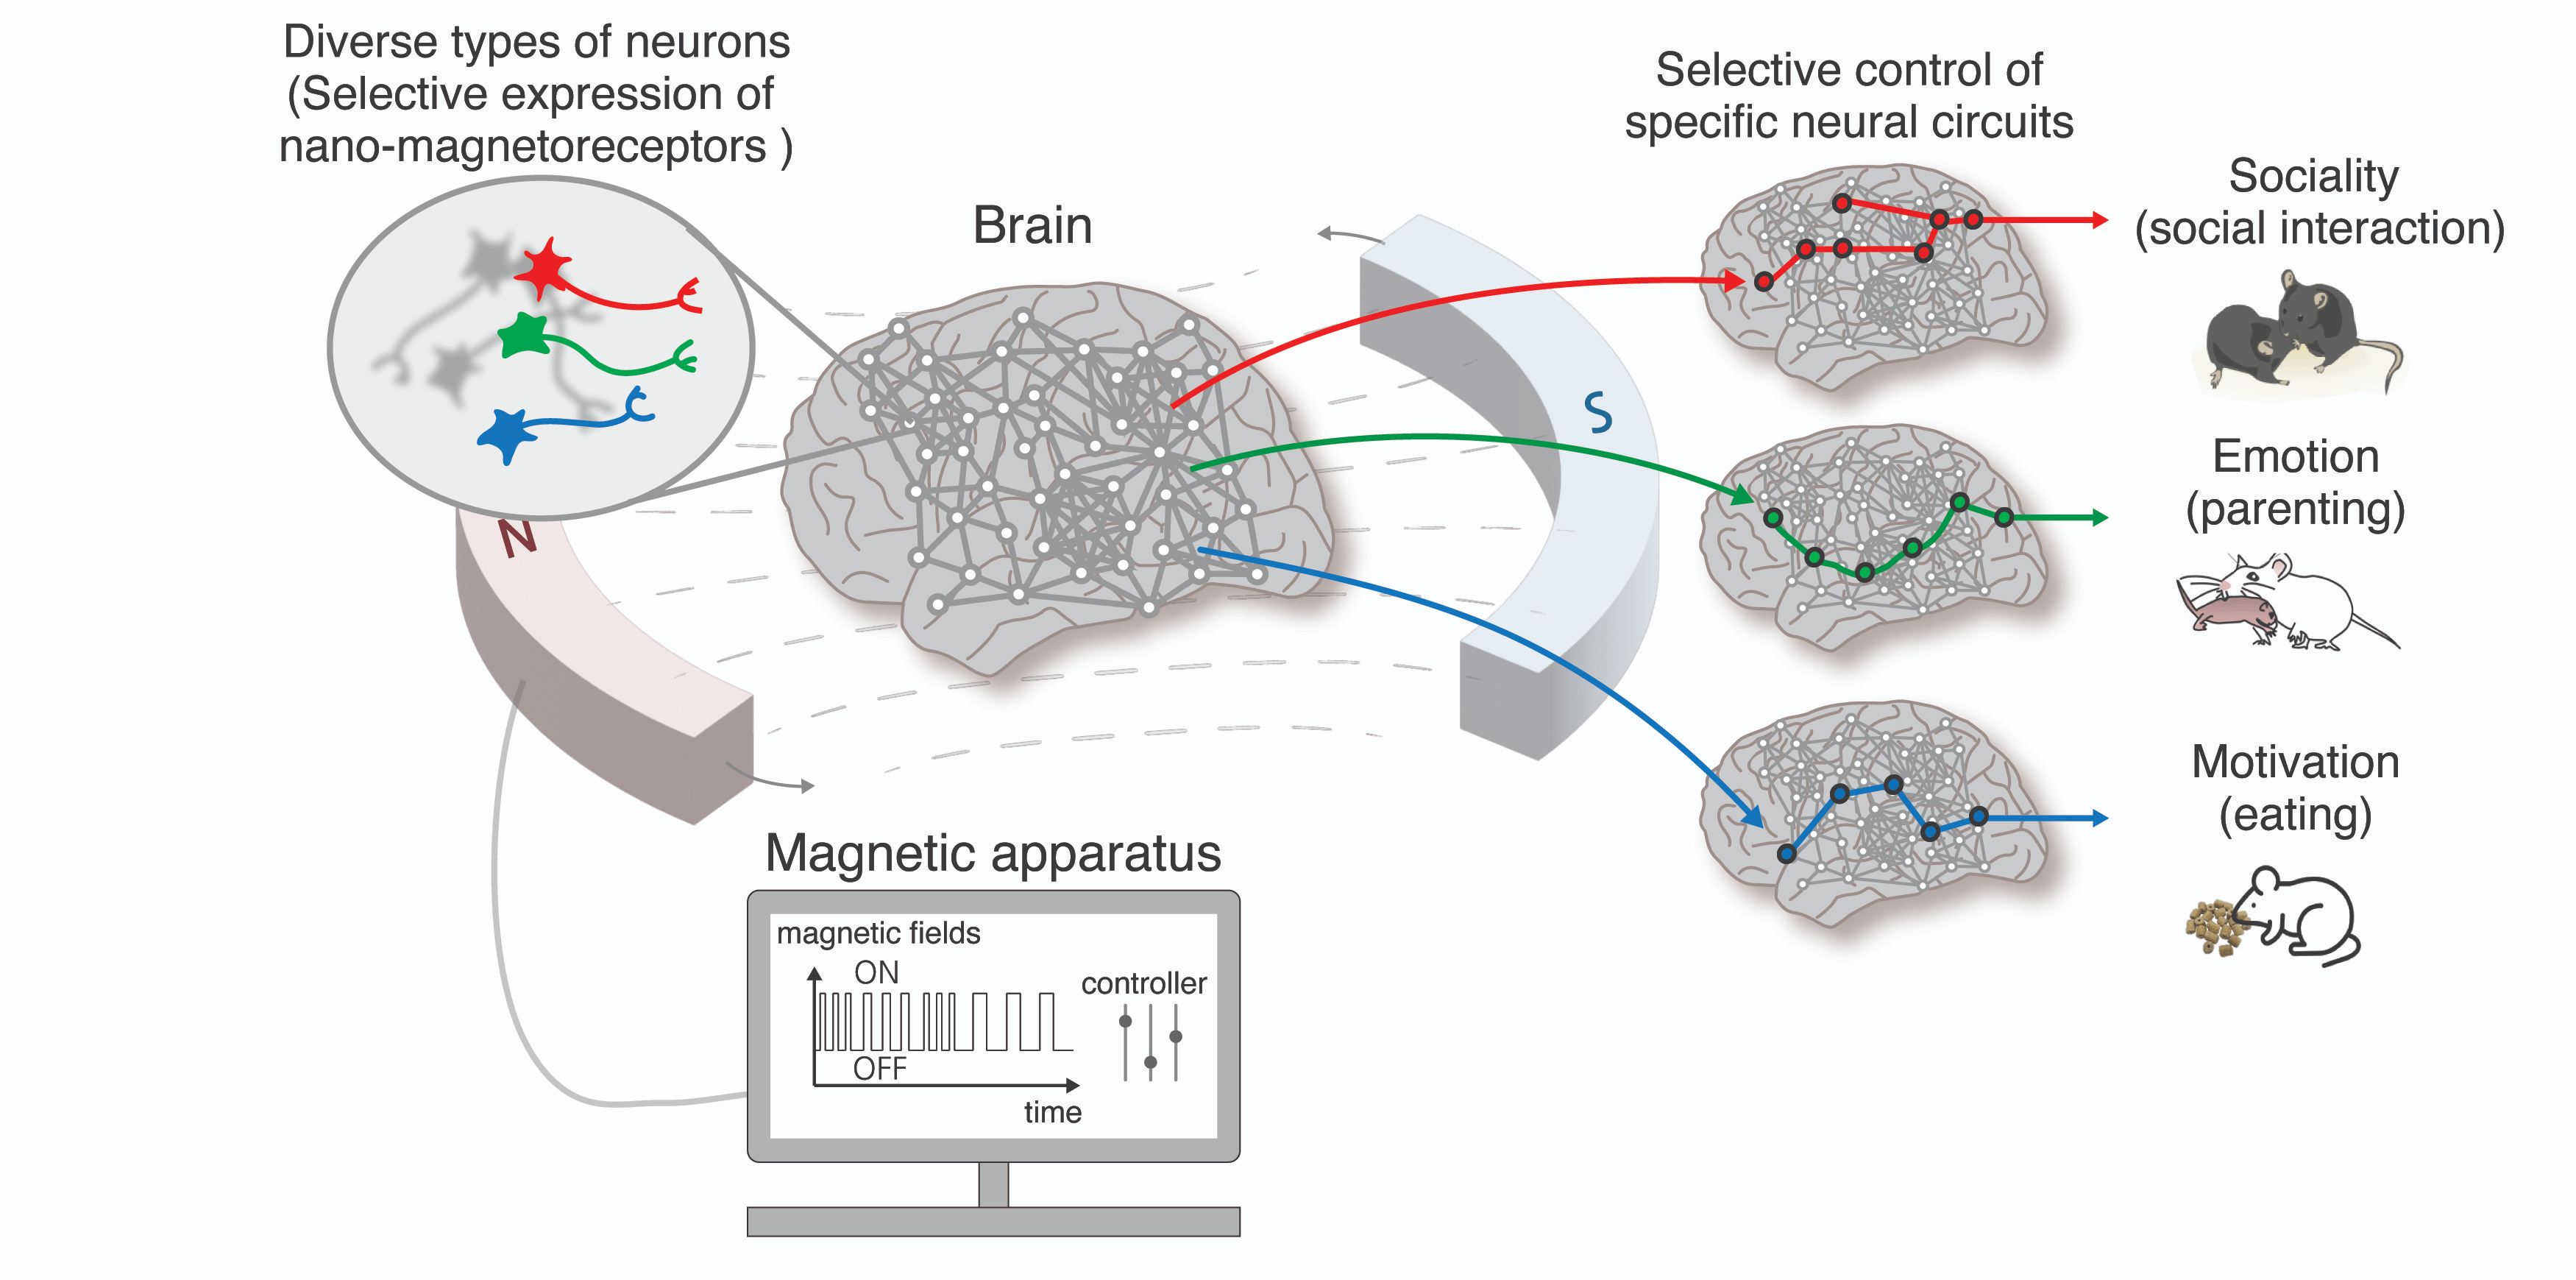 Figure 1. Overview of nano-MIND technology - regulation of higher-order brain functions through selective control of specific neurons and brain circuits